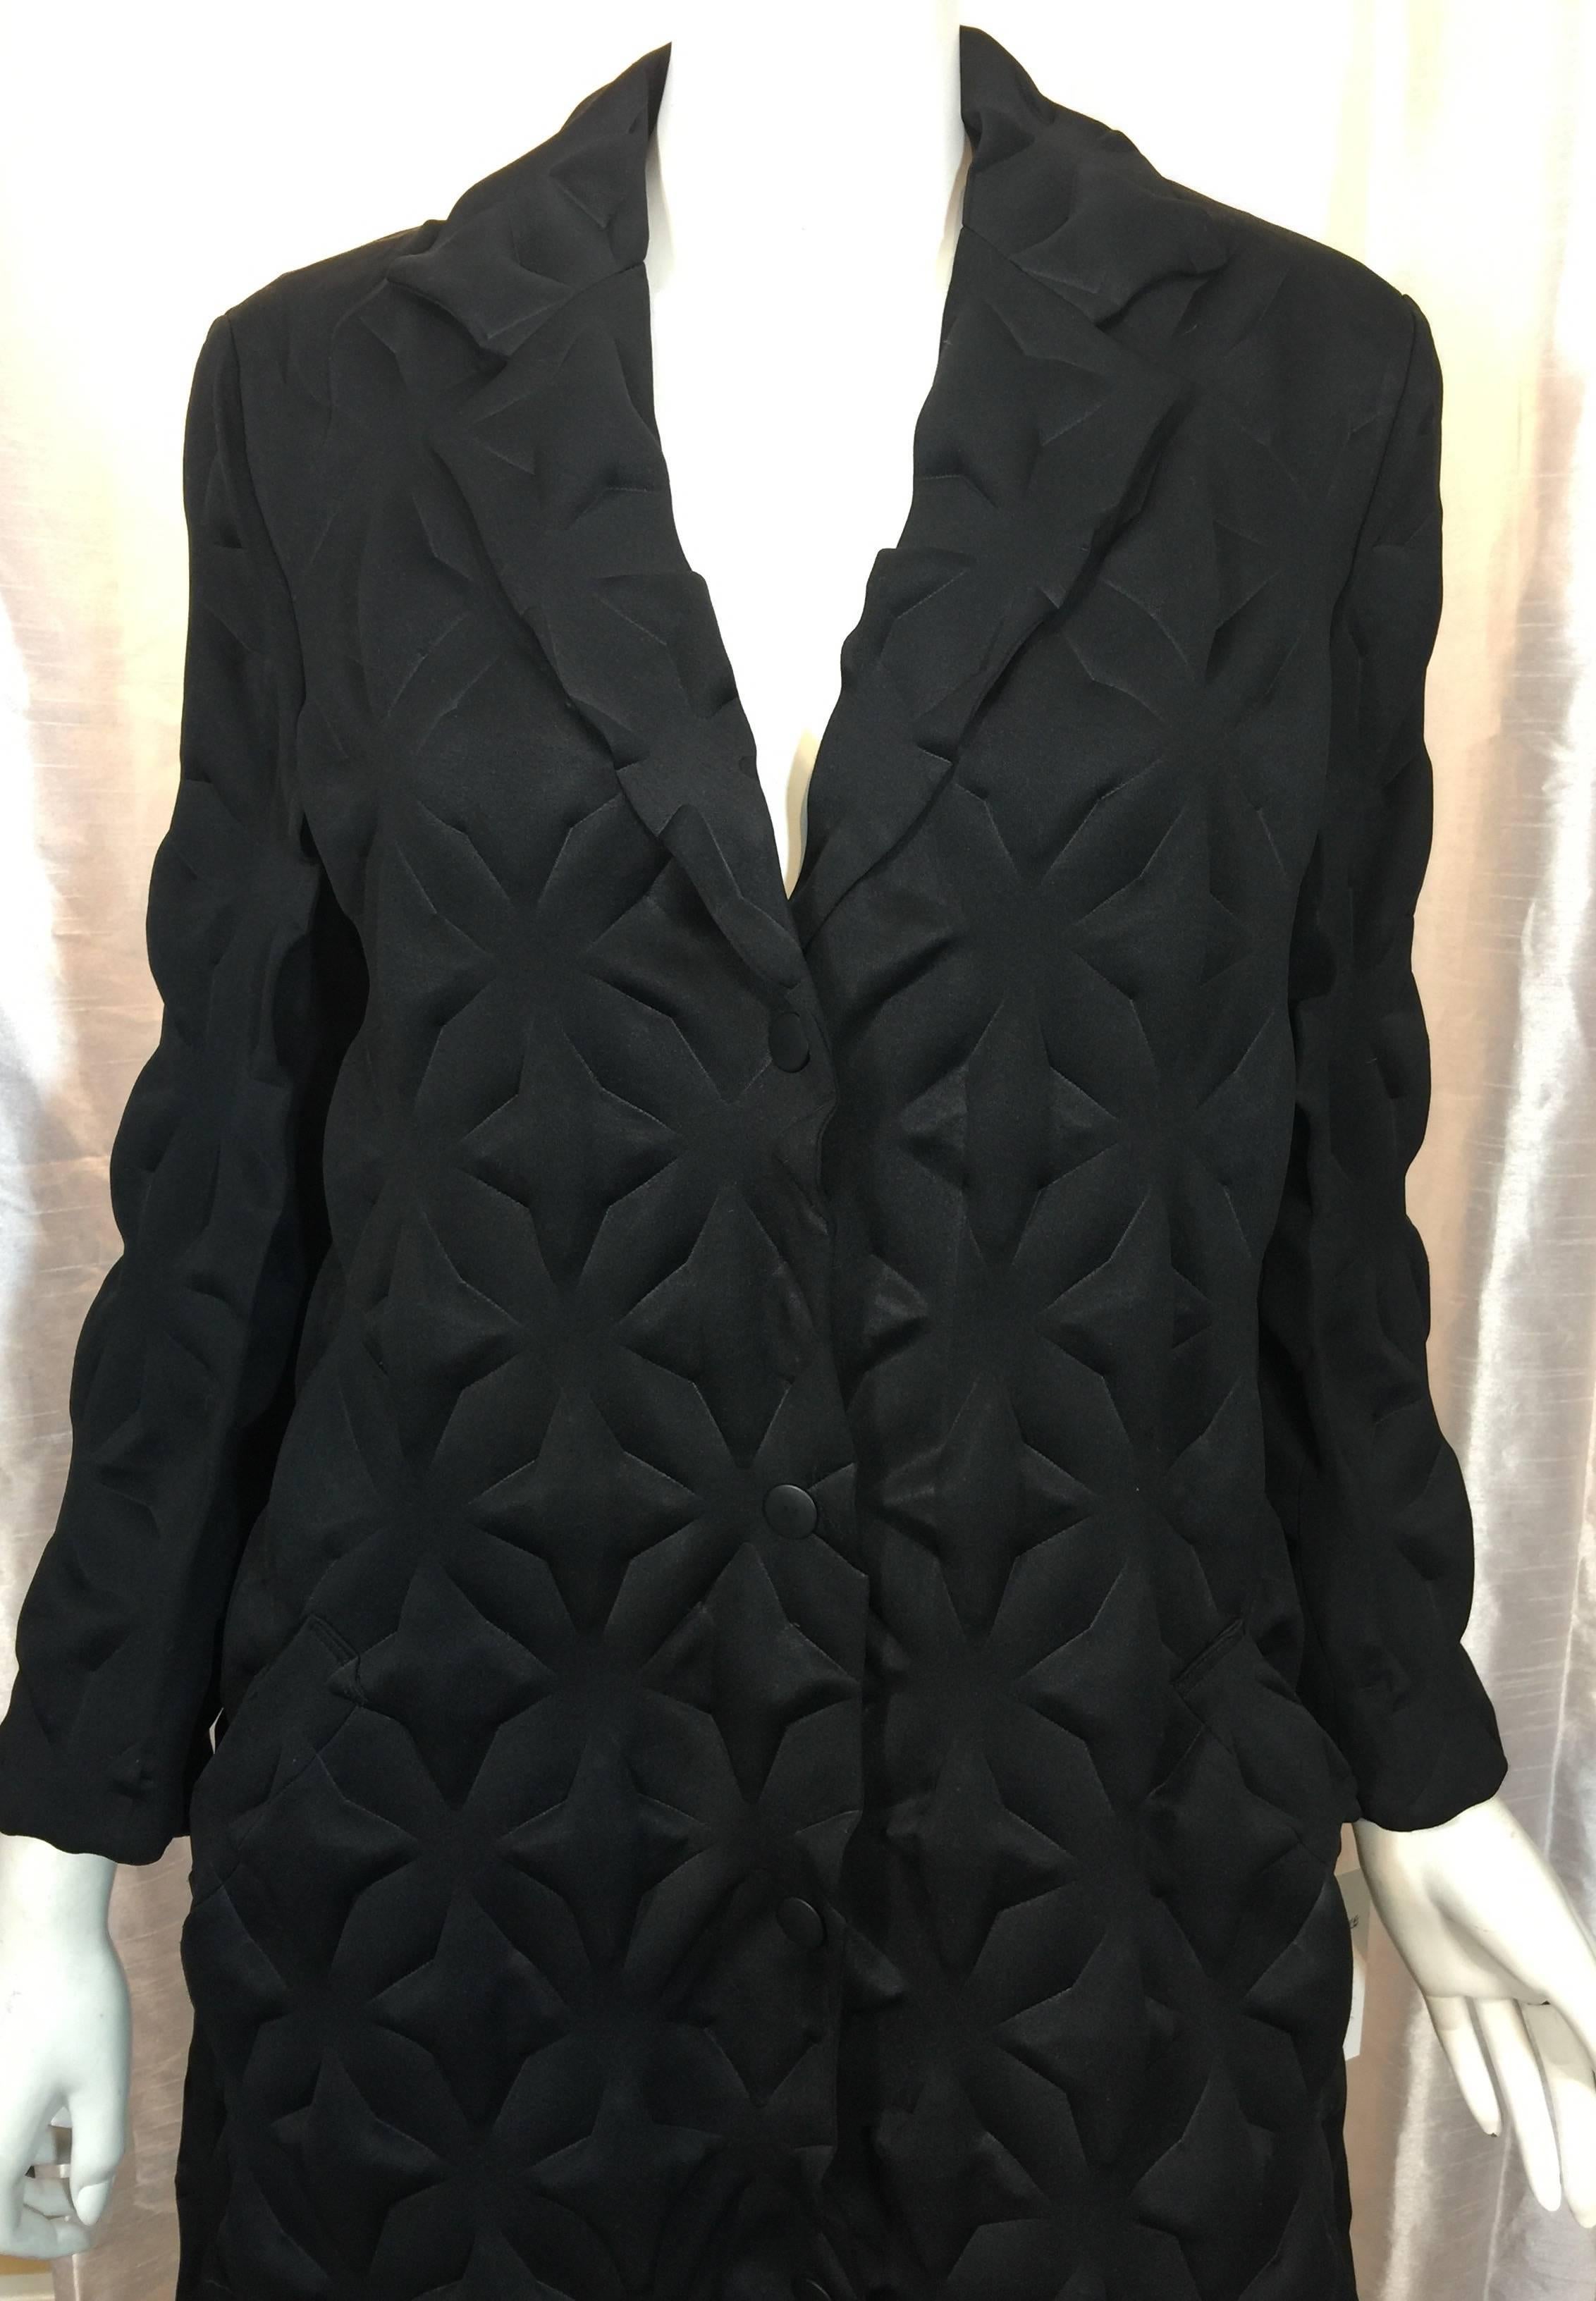 Rare Issey Miyake Black Star Embossed Egg Crate / Egg Carton Unlined Coat with Side pockets and Snap Front Closure

Coat made from black medium weight polyester that has been embossed with a star pattern ( a different and rare version of the coat